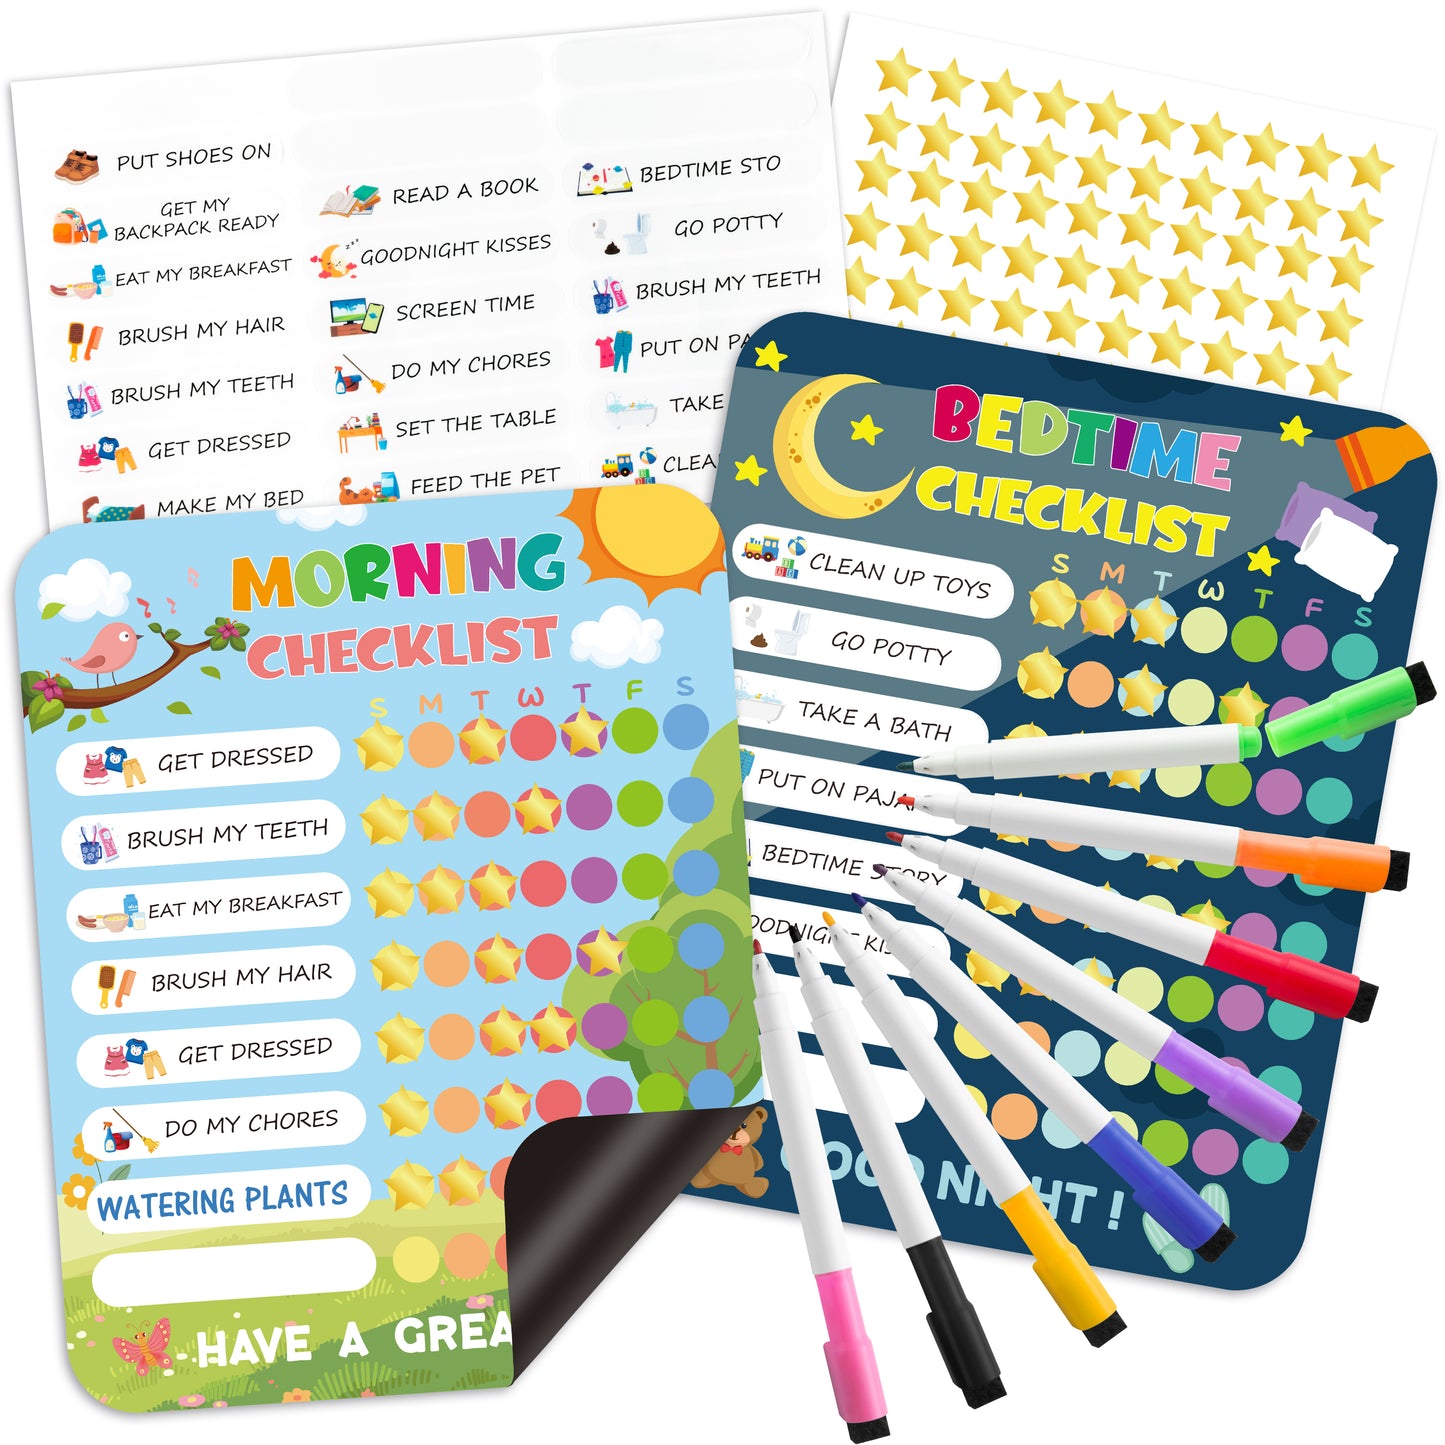 COcnny 154pcs Daily Schedule for Kids, Magnetic Schedule Board, Home Visual Daily Routine Chart, Morning Bedtime Behavior Checklist, Responsibility Reward Chore Charts Task Planning for Toddlers